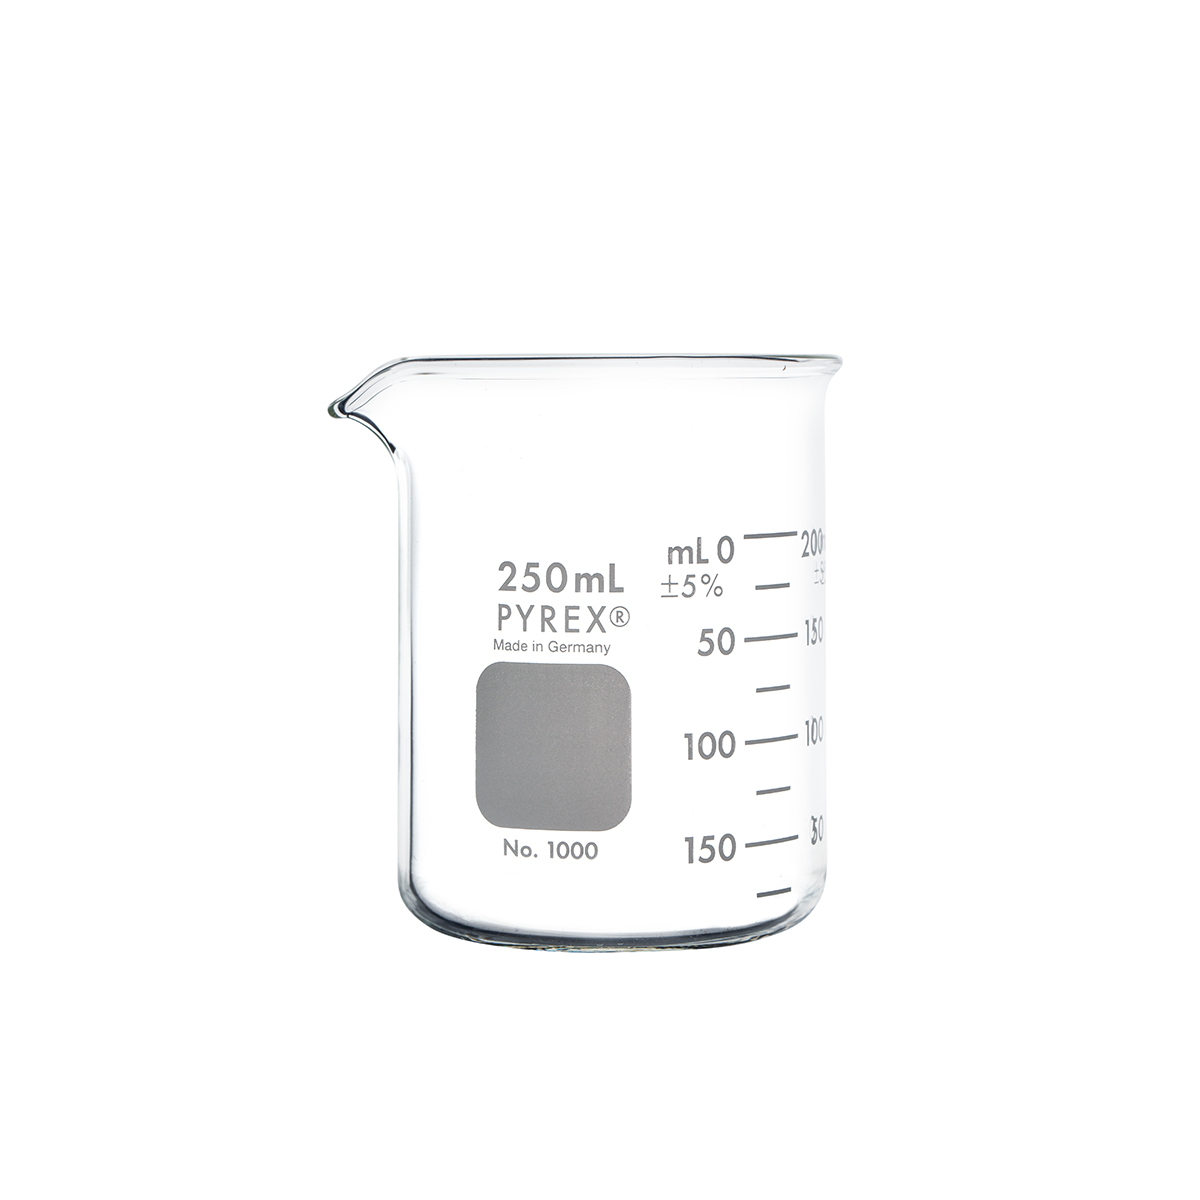 Pyrex Borosilicate Heavy-Duty Low Form Beakers - 250 ml - Pack of 12